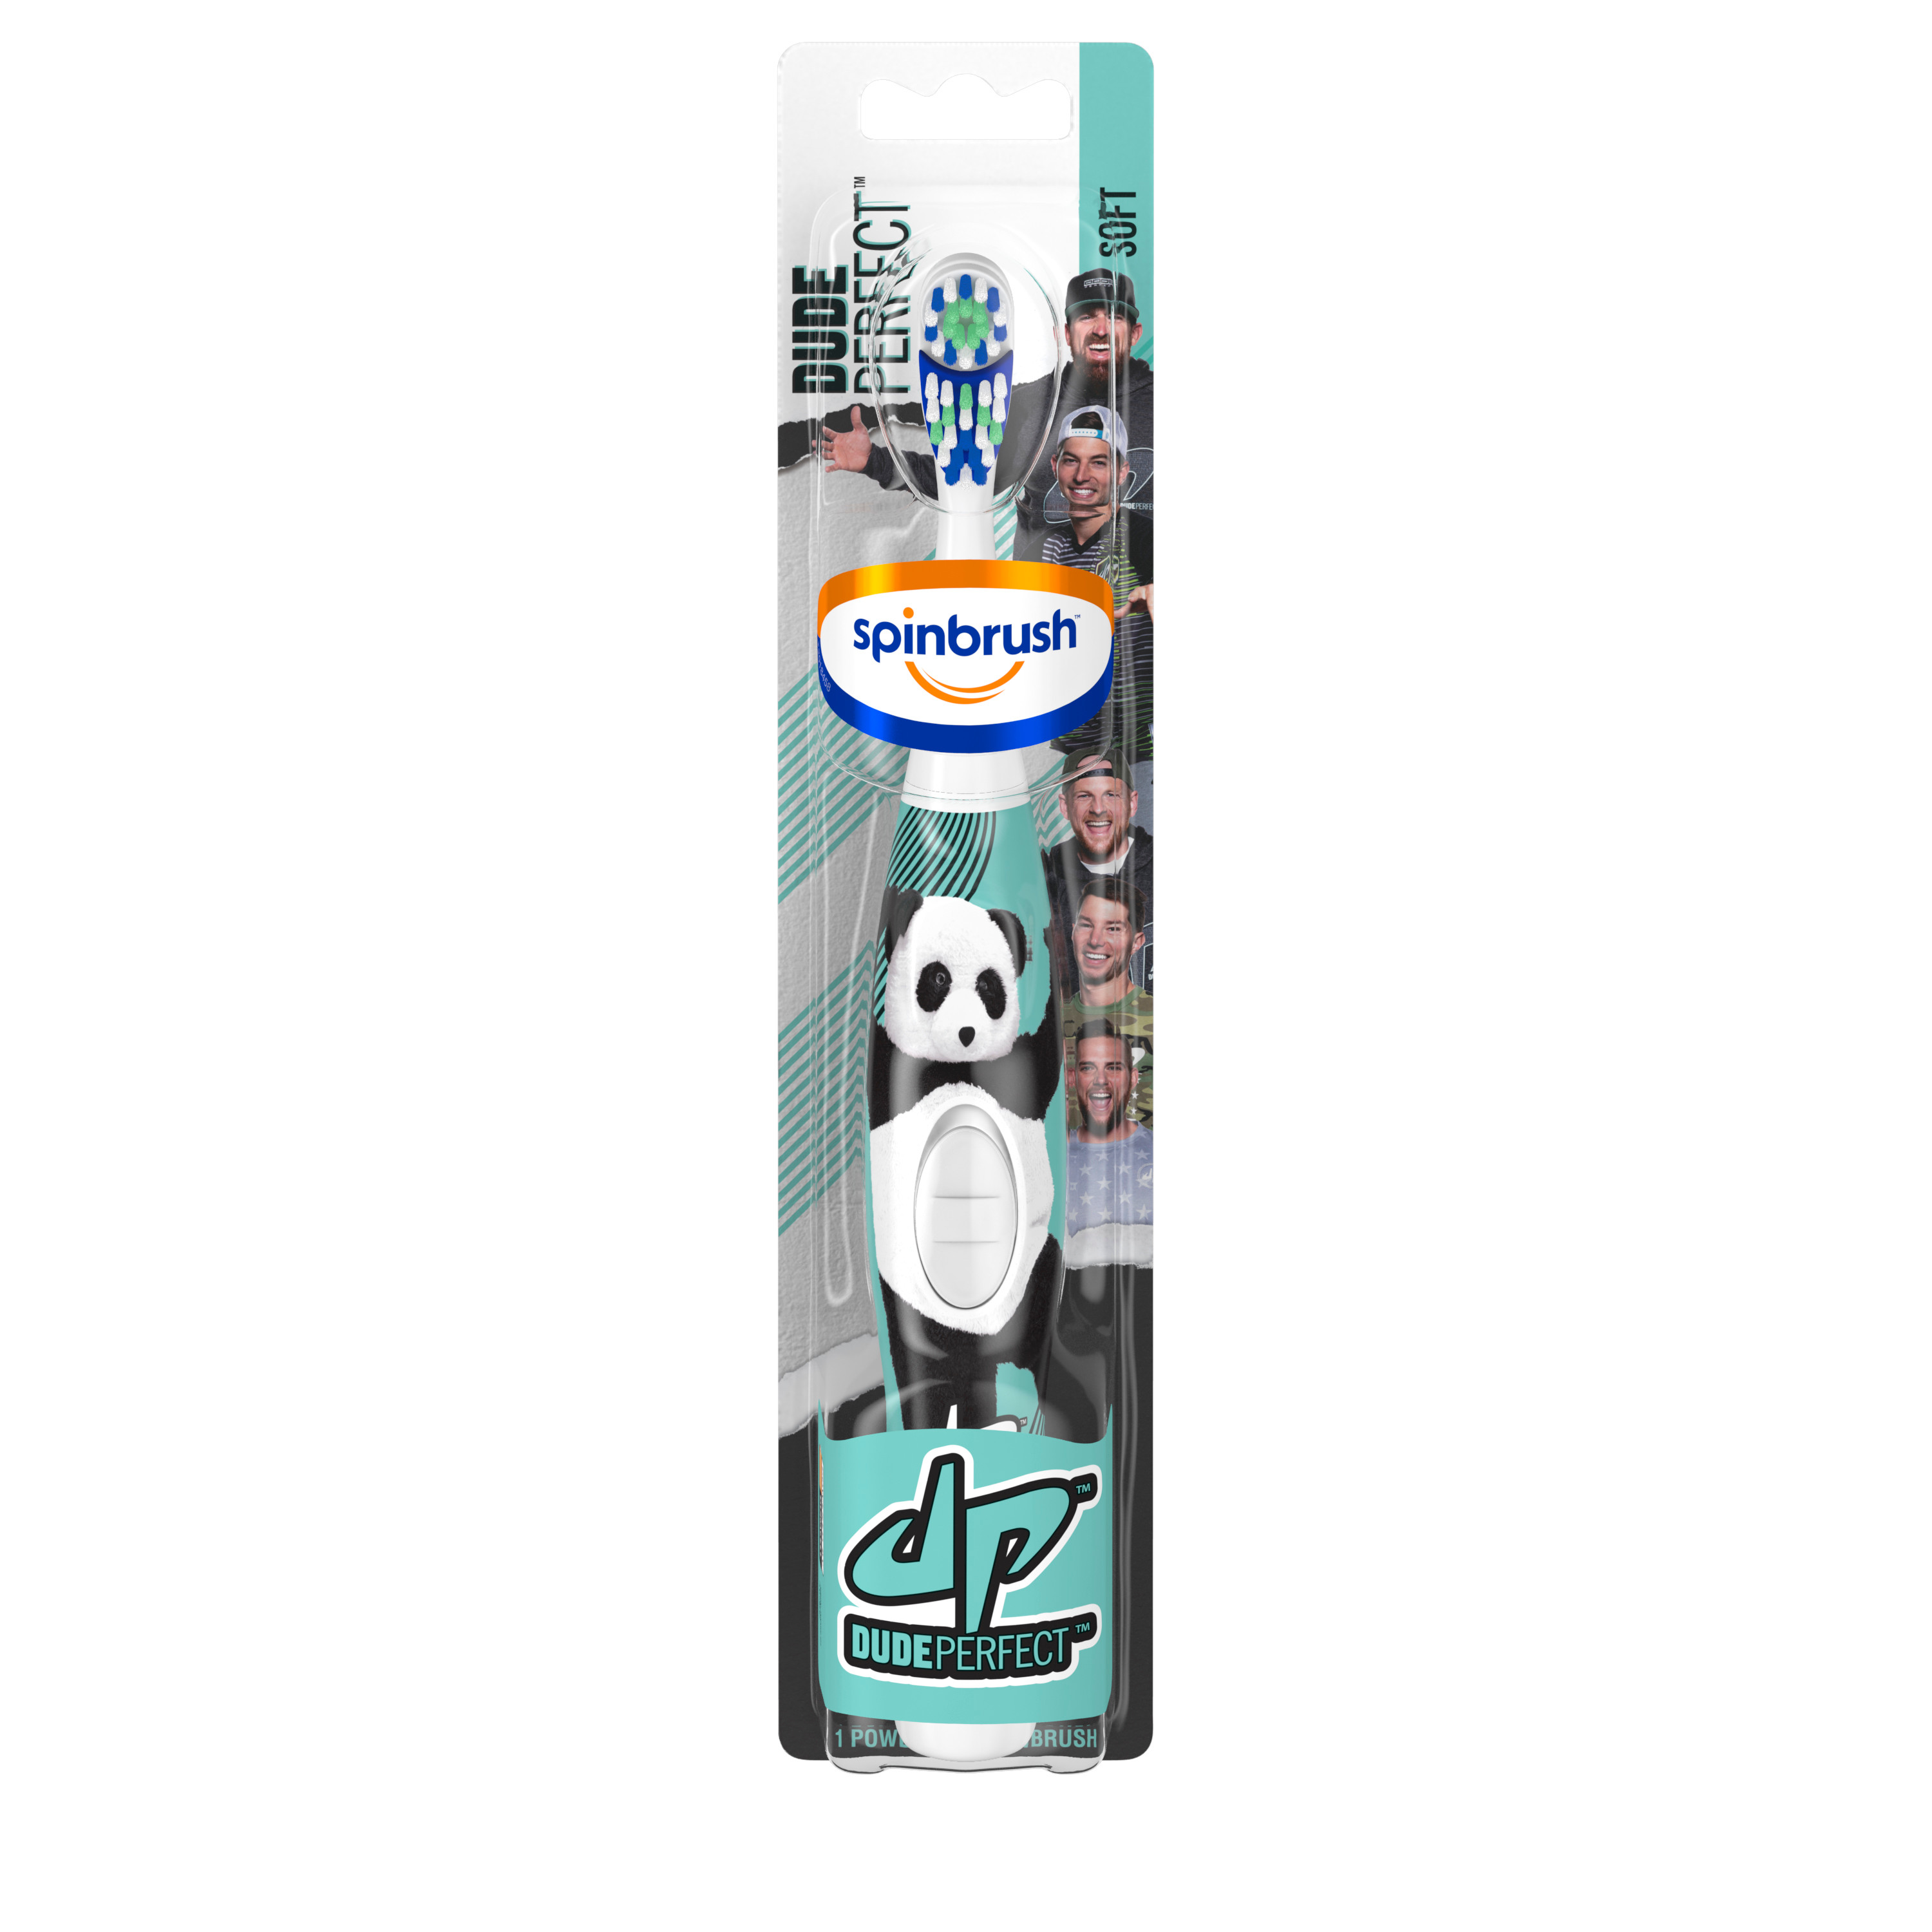 Dude Perfect Kid’s Spinbrush Electric Battery Toothbrush, Soft, 1ct - image 1 of 2